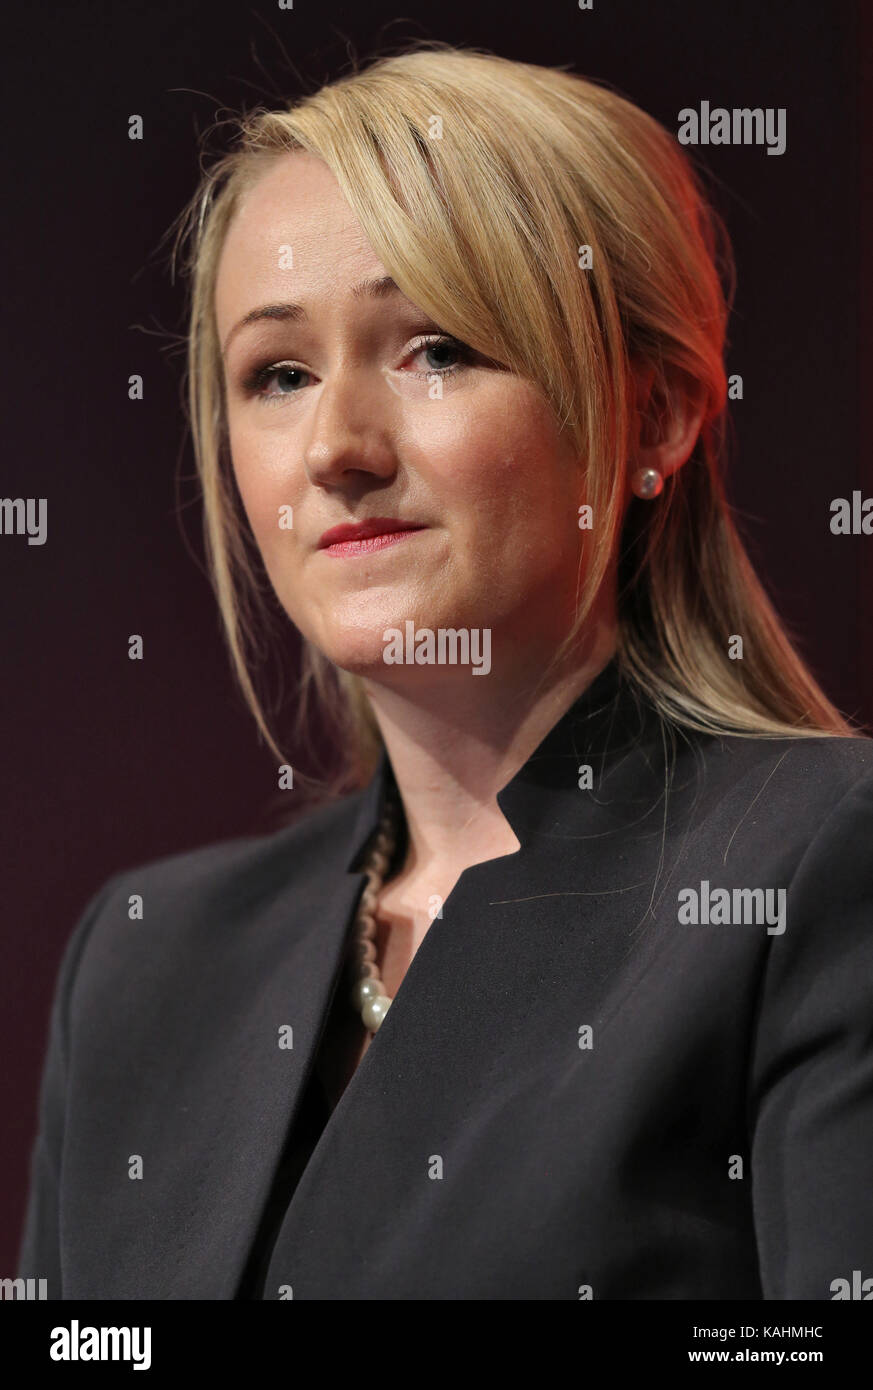 Brighton, UK. 26th September, 2017. Rebecca Long Bailey Mp Shadow Secretary Of State For Business Labour Party Conference 2017 The Brighton Centre, Brighton, England 26 September 2017 Addresses The Labour Party Conference 2017 At The Brighton Centre, Brighton, England Credit: Allstar Picture Library/Alamy Live News Stock Photo